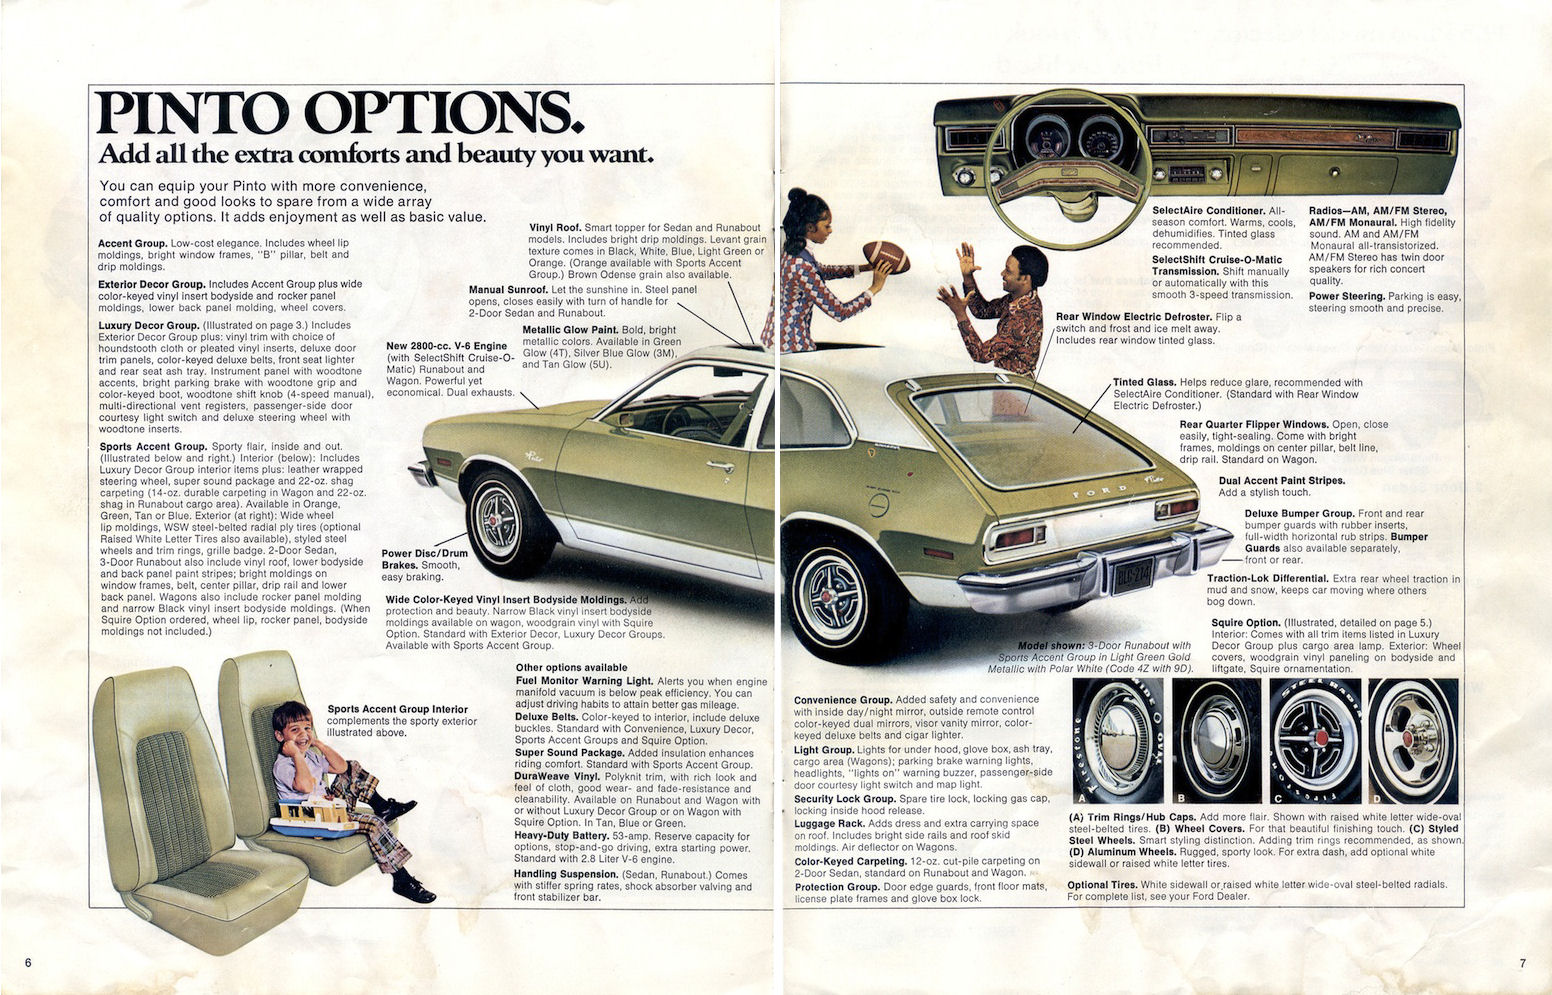 1975_Ford_Pinto-06-07